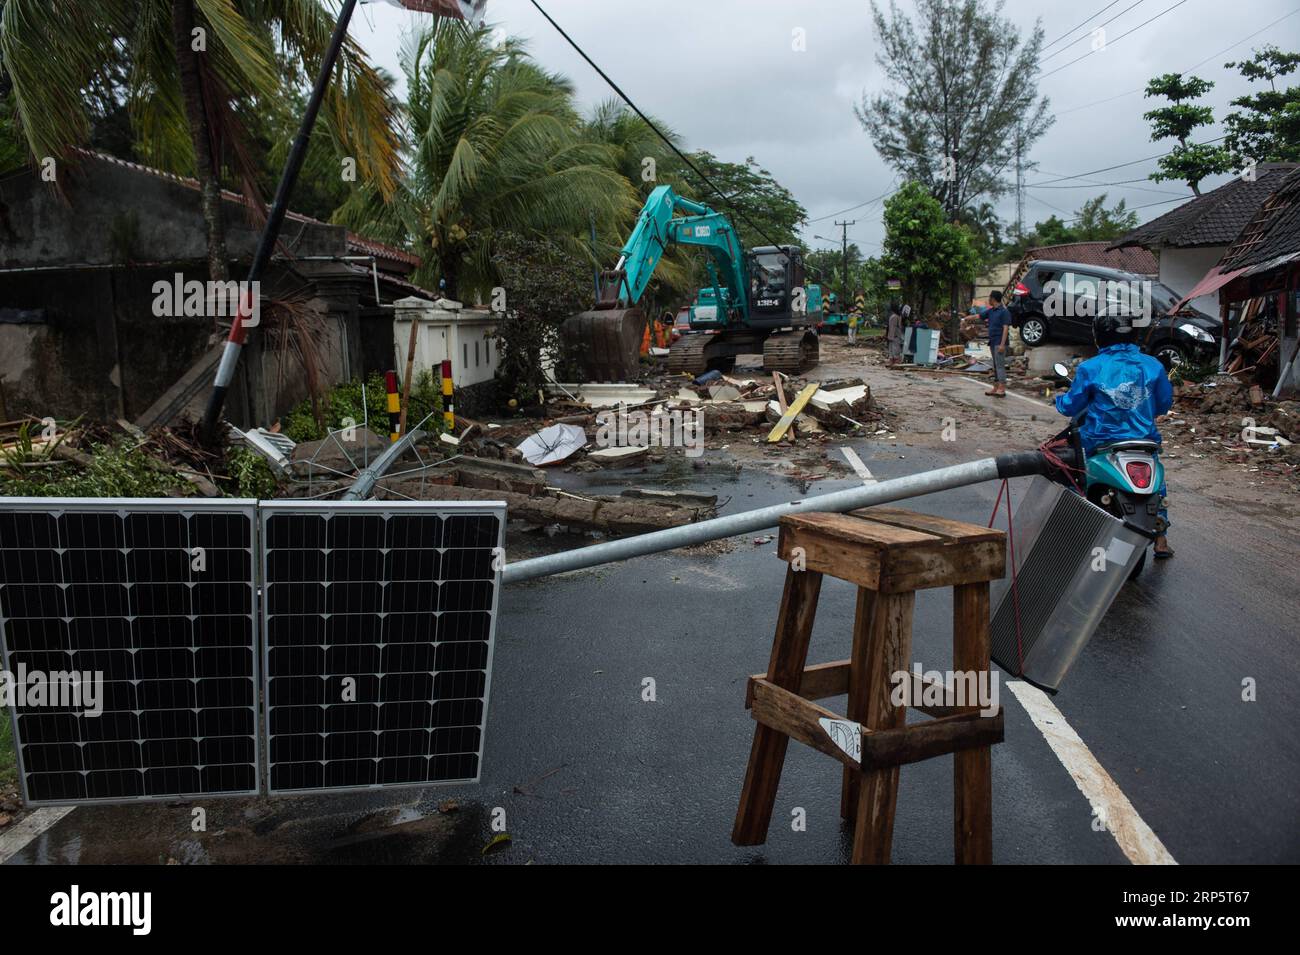 (181223) -- PANDEGLANG, Dec. 23, 2018 -- An excavator cleans road from debris after a tsunami hit Sunda Strait in Pandeglang, Banten province, in Indonesia, Dec. 23, 2018. The total casualty of a tsunami triggered by the eruption of Krakatau Child volcano has increased to 168 people in coastal areas of Sunda Strait of western Indonesia, disaster agency official said here on Sunday. The catastrophe killed at least 168 people, wounded at least 745 ones and collapsed a total of 430 houses and nine hotels, and caused damages to scores of ships. ) INDONESIA-PANDEGLANG-TSUNAMI-AFTERMATH VerixSanovri Stock Photo